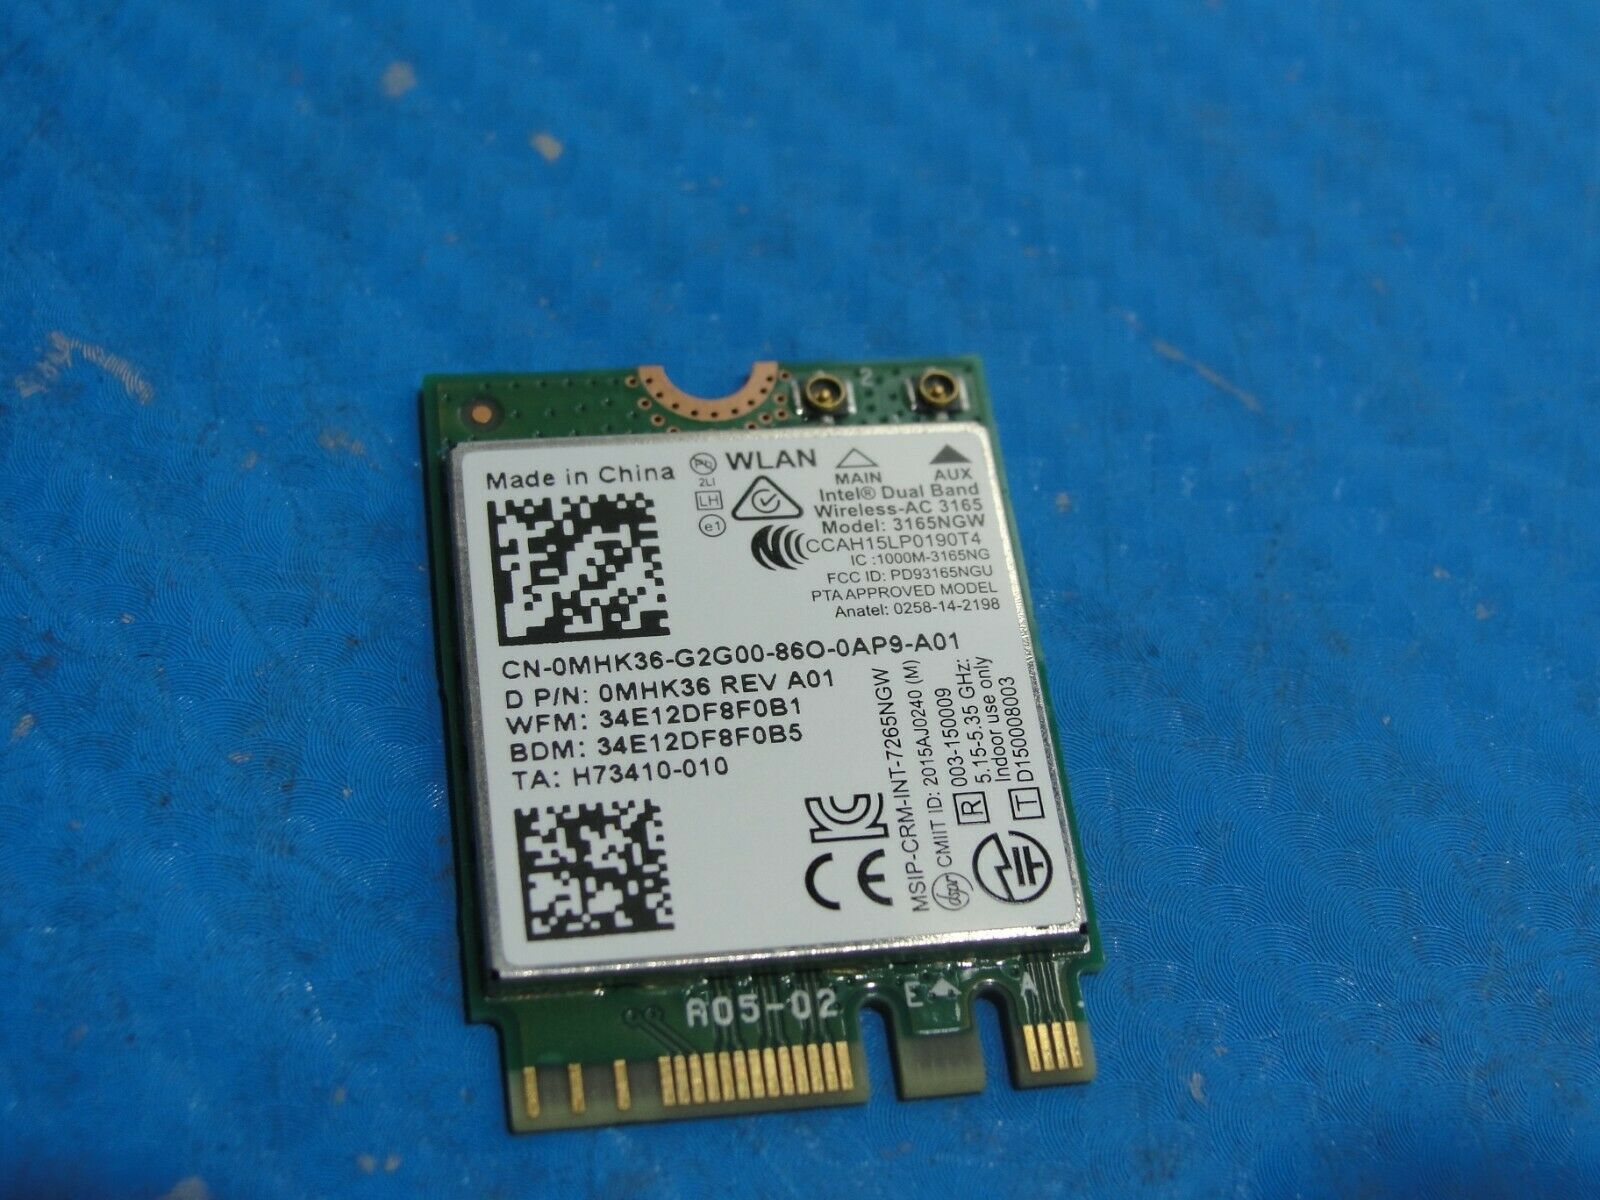 Dell Inspiron 15.6" 15 5570 Genuine Laptop Wireless Wifi Card 3165NGW MHK36 - Laptop Parts - Buy Authentic Computer Parts - Top Seller Ebay